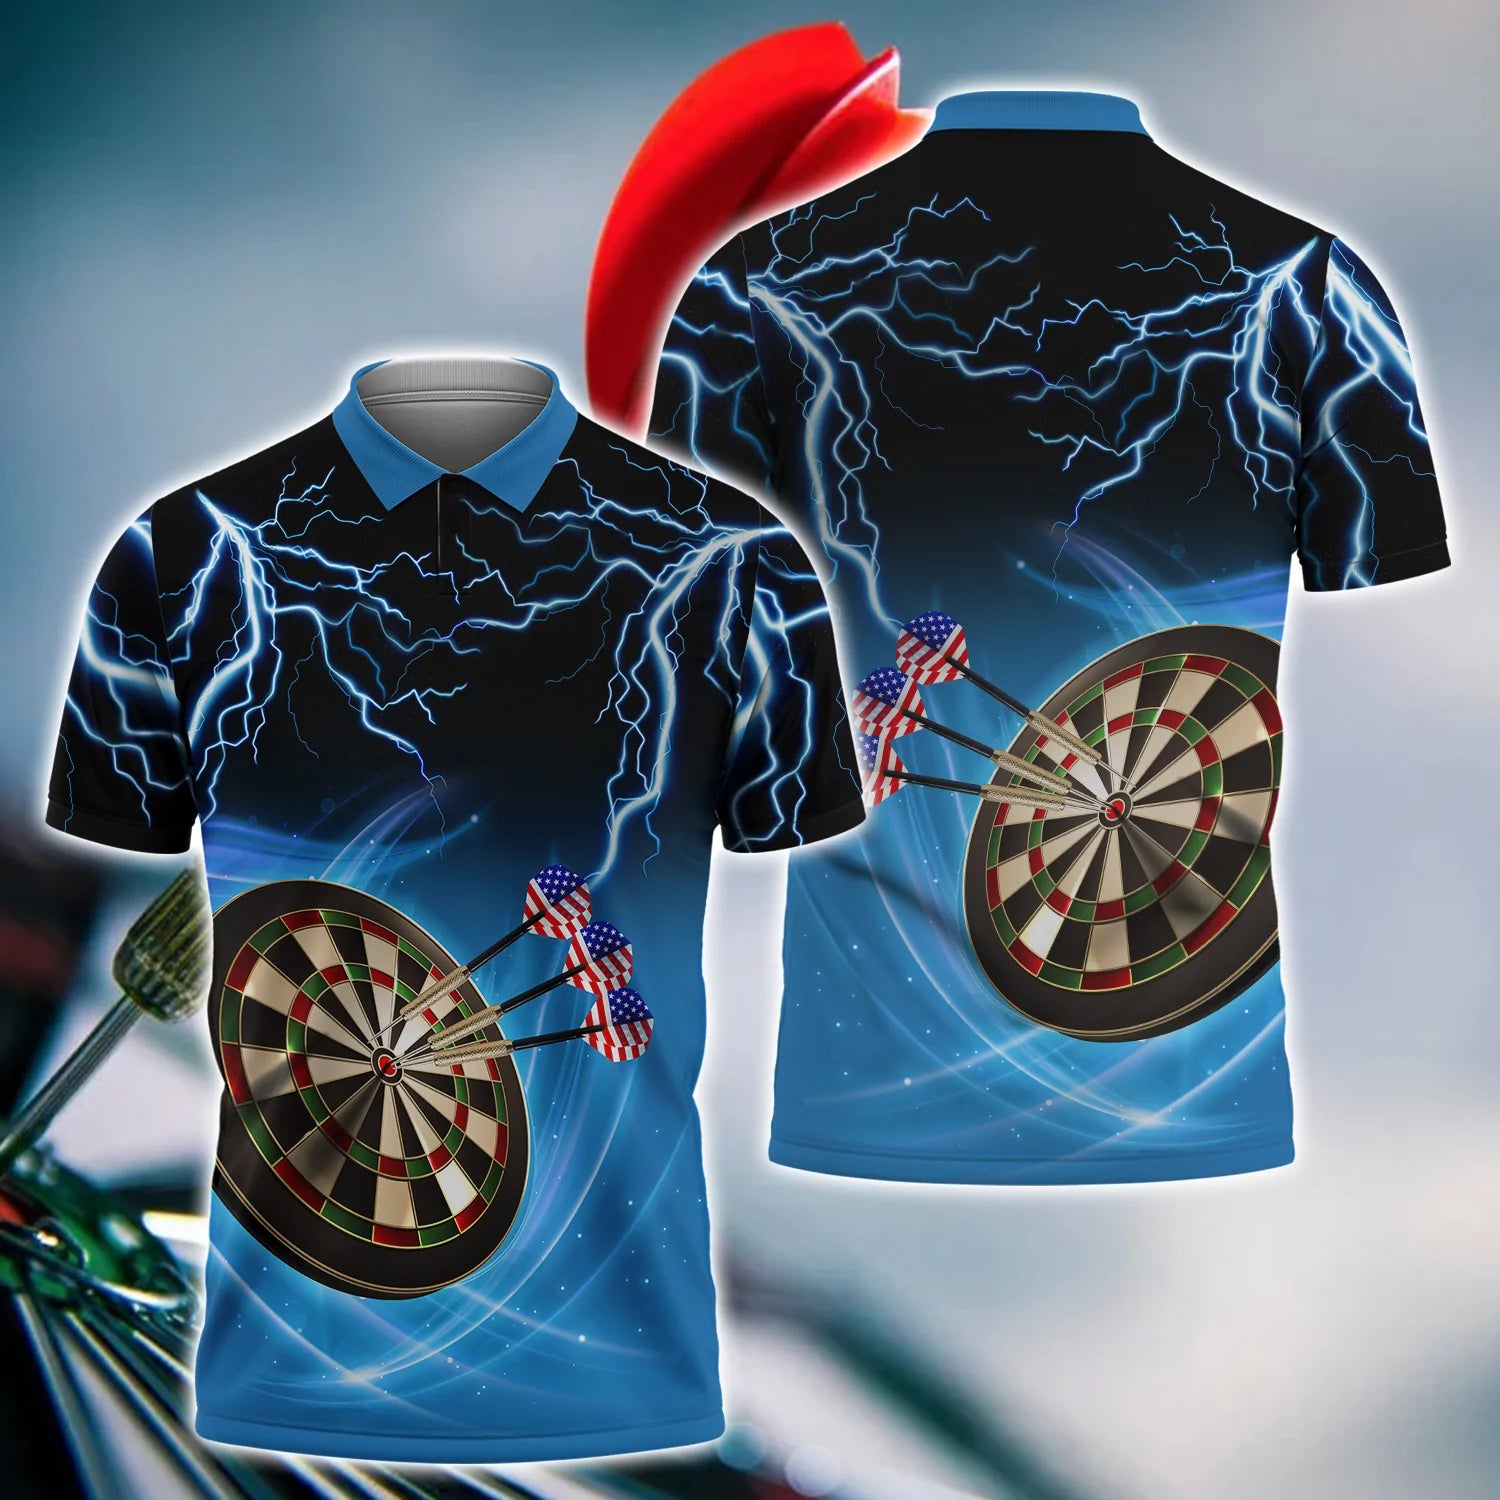 3D Polo Shirt with American Flag Design for Dart Players: A Humorous and Sporty Shirt for Championships and Dart Teams – DP122